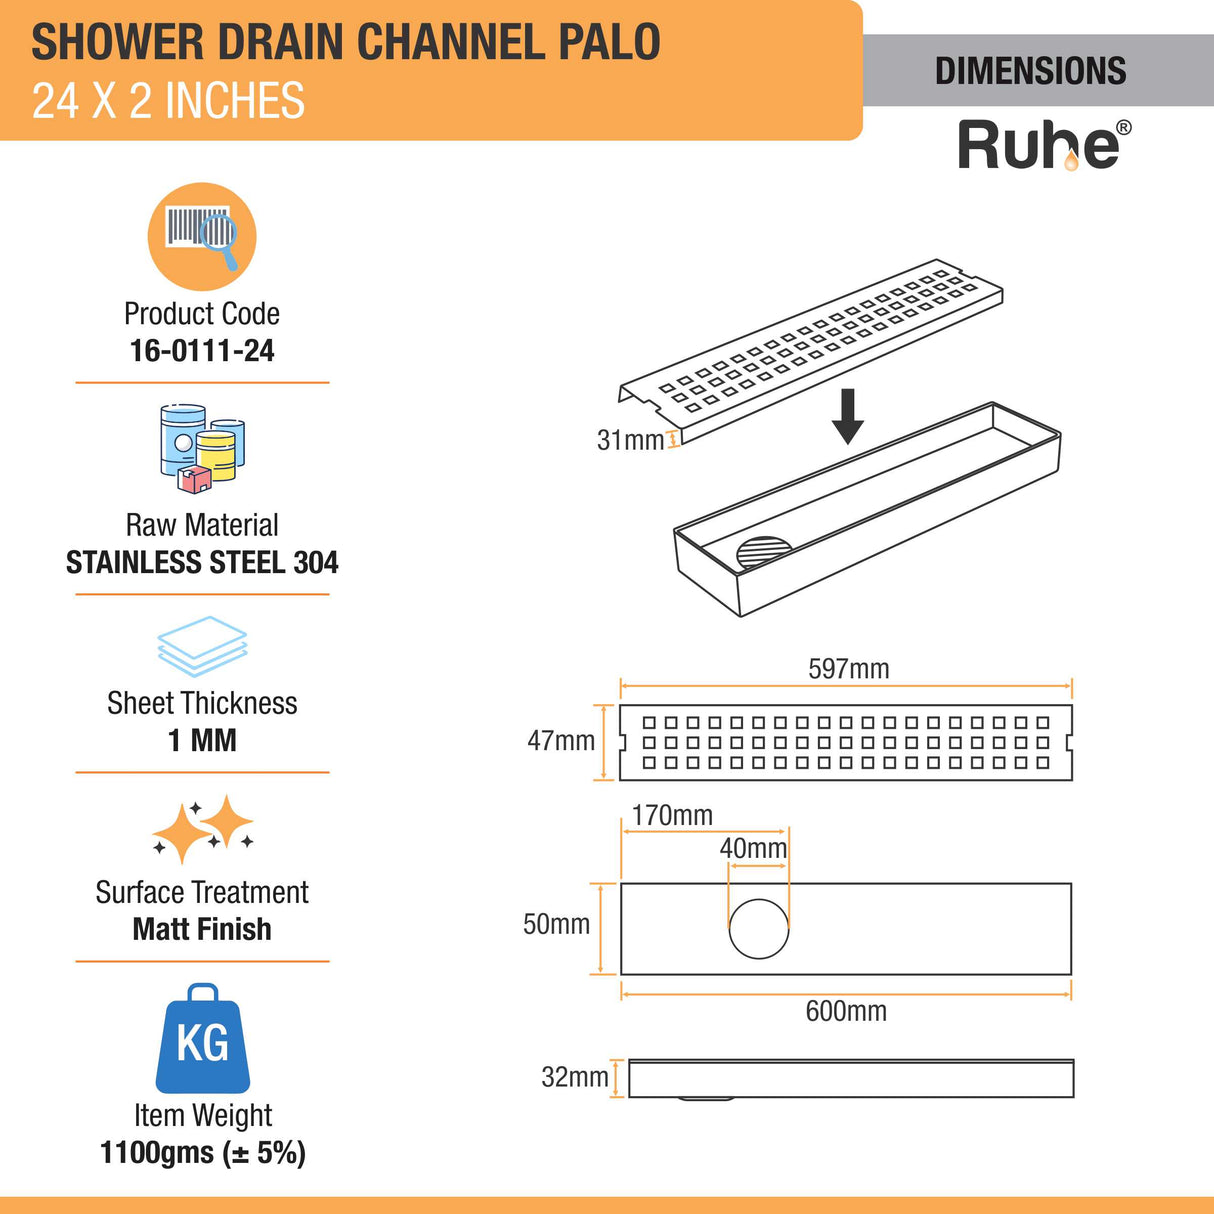 Palo Shower Drain Channel (24 X 2 Inches) (304 Grade) dimensions and size